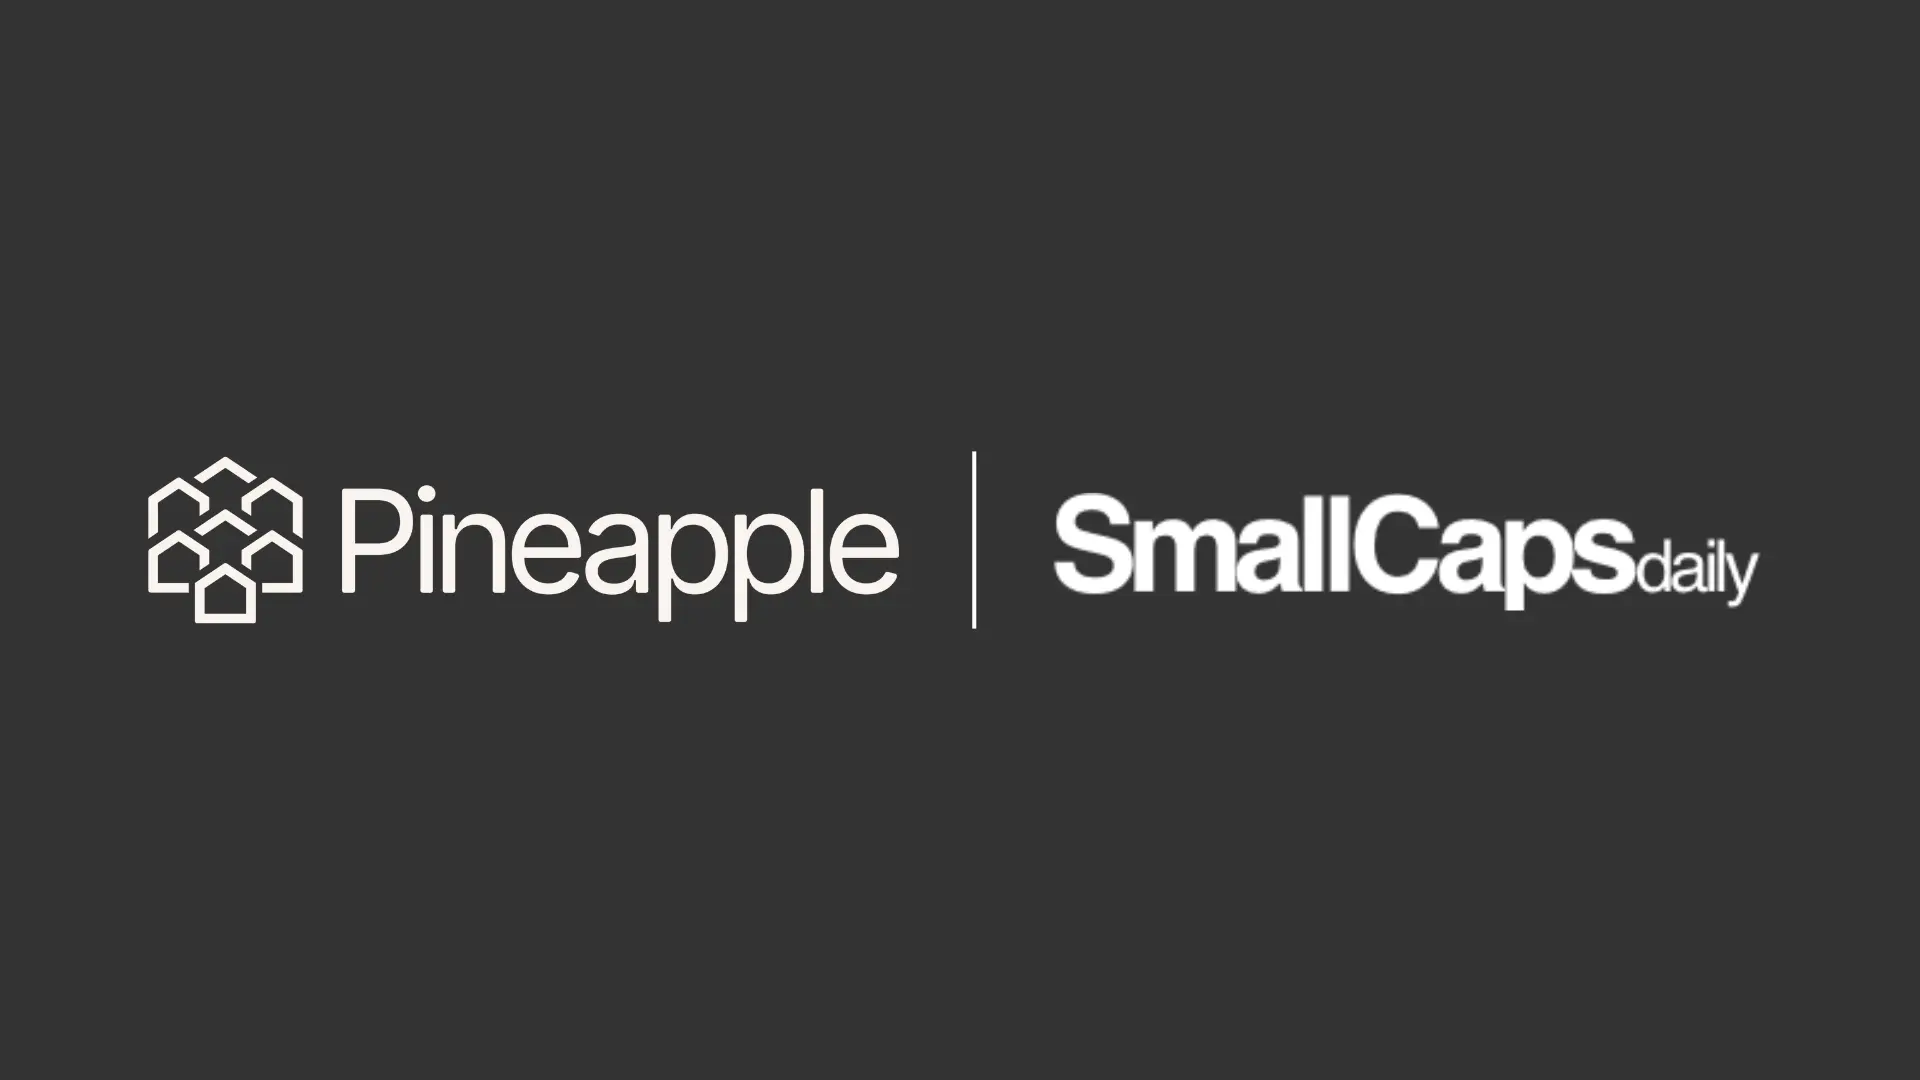 Pineapple Financial Inc. CEO, Shubha Dasgupta, is Featured in an Interview with SmallCapsDaily